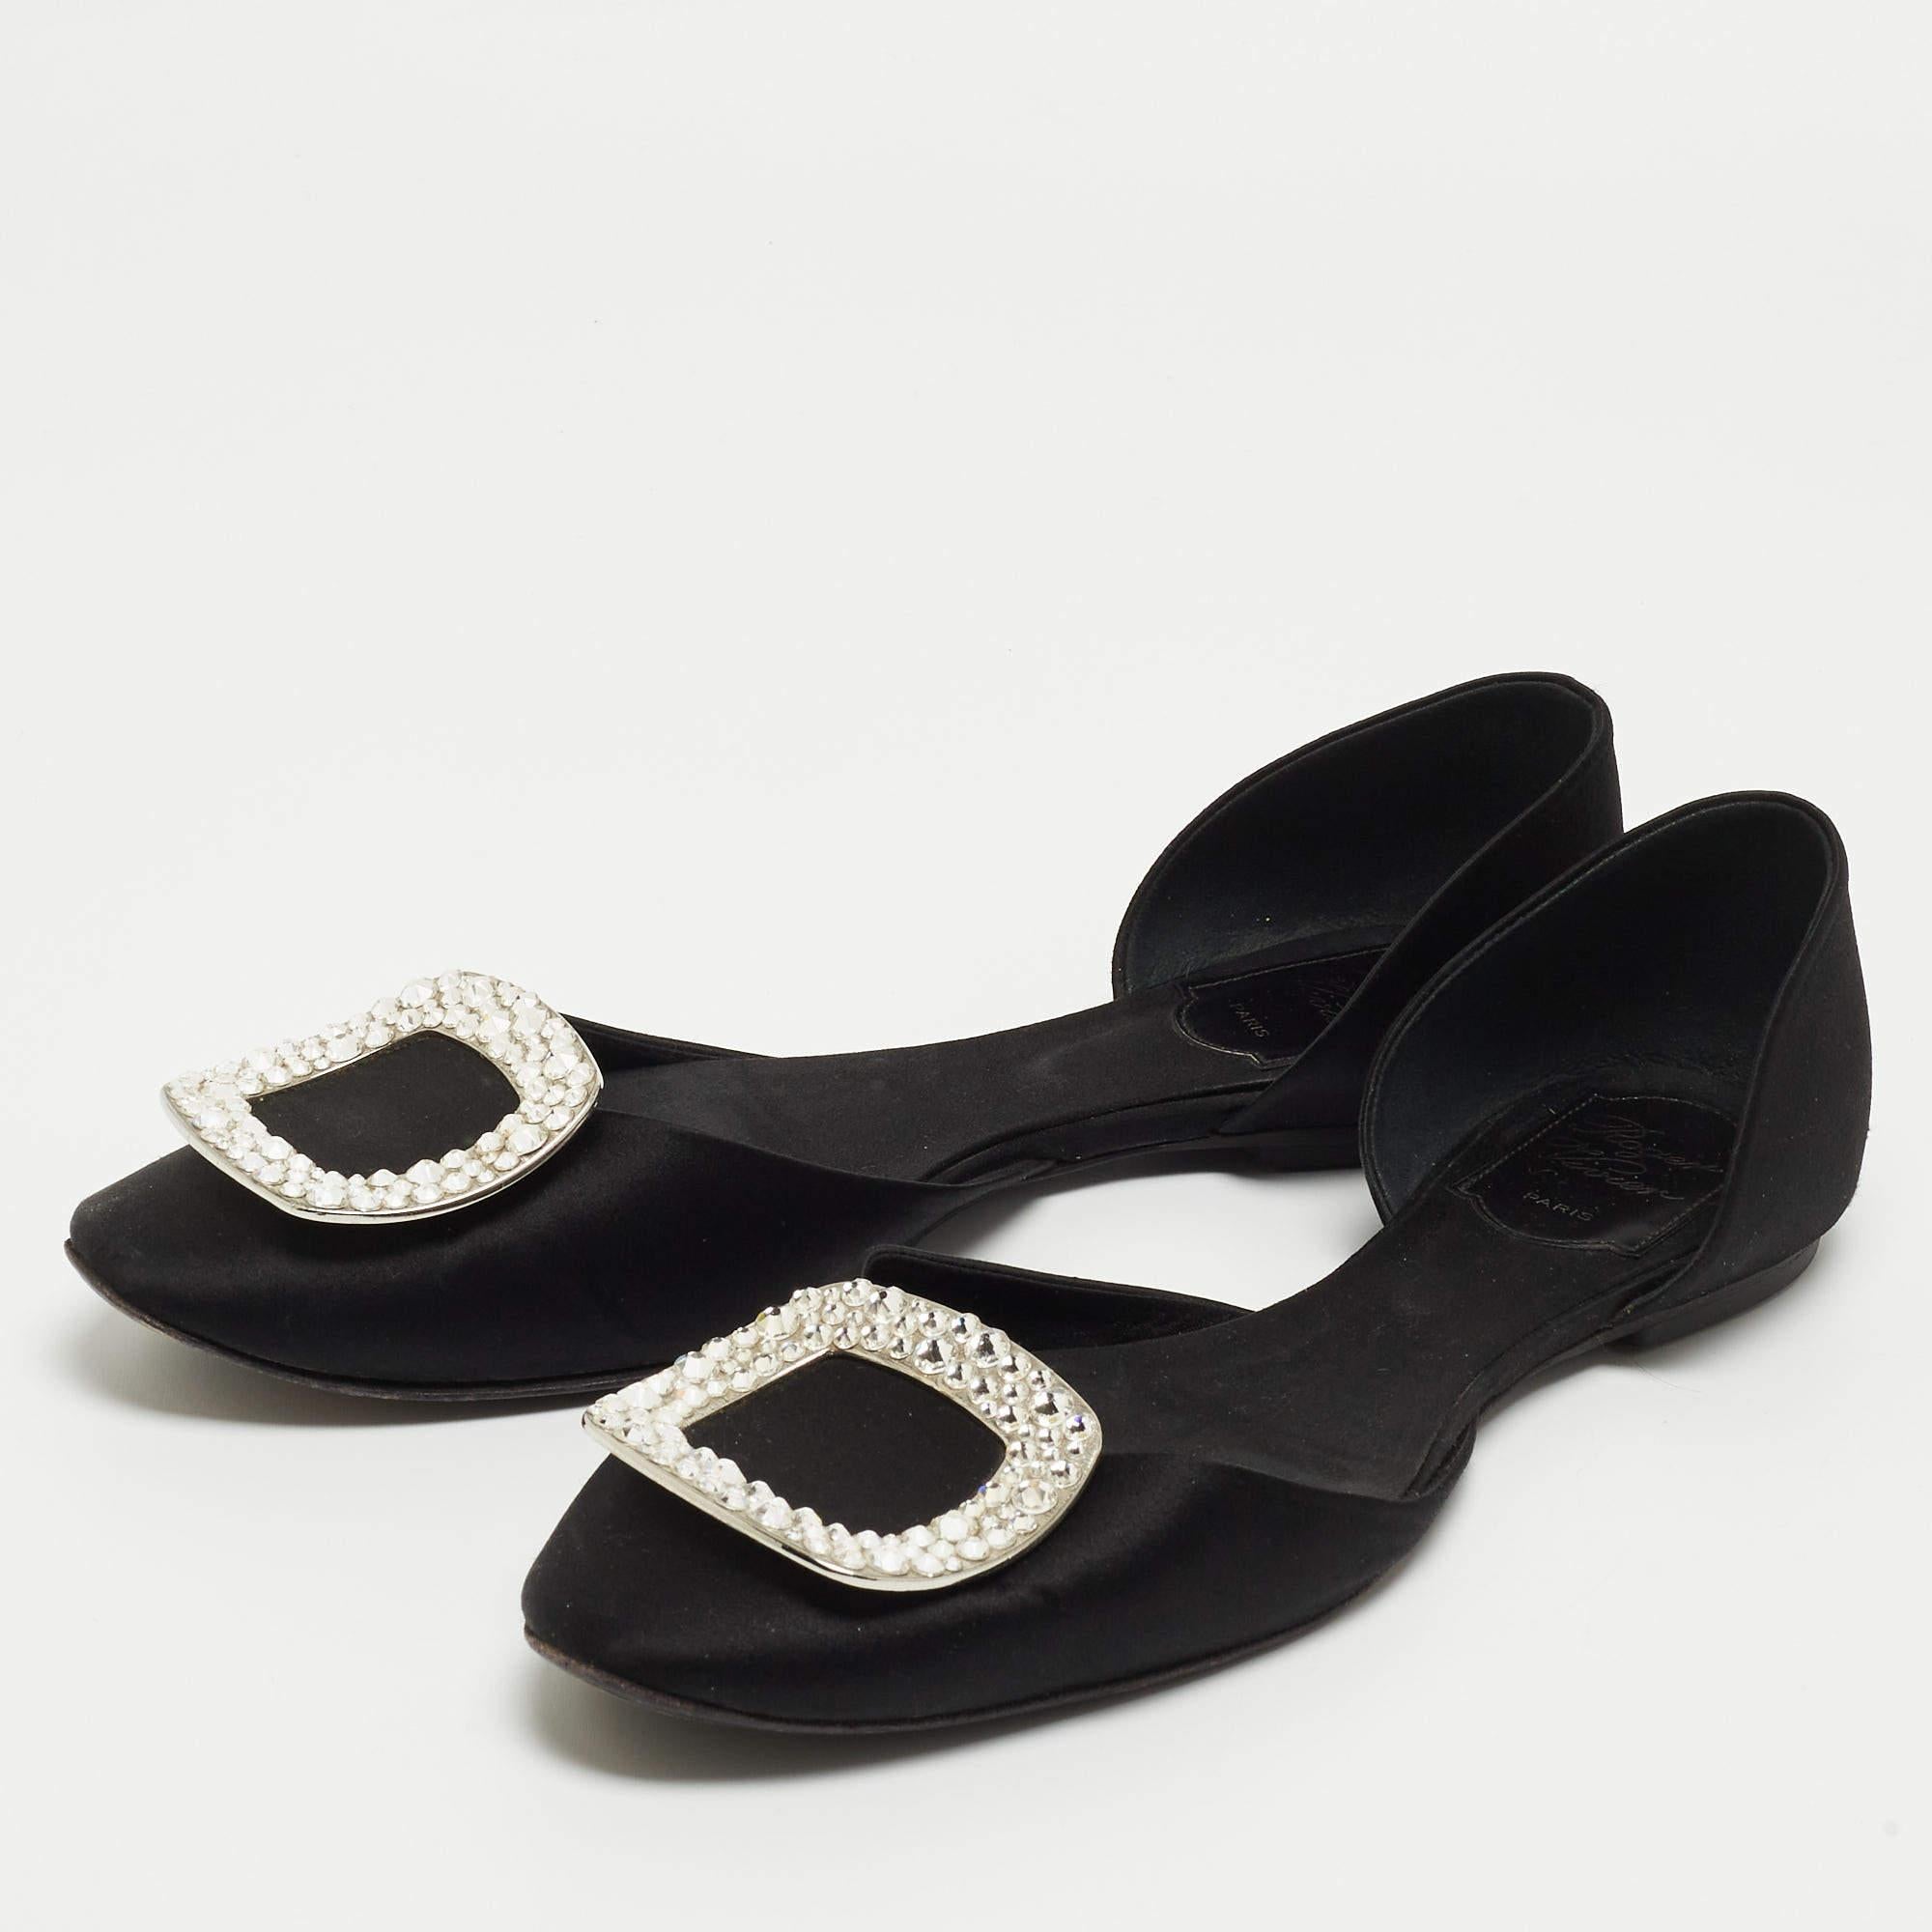 Chic and comfortable, these ballet flats from Roger Vivier and perfect for a host of occasions. They have been crafted from black satin and are styled with embellished toes.

